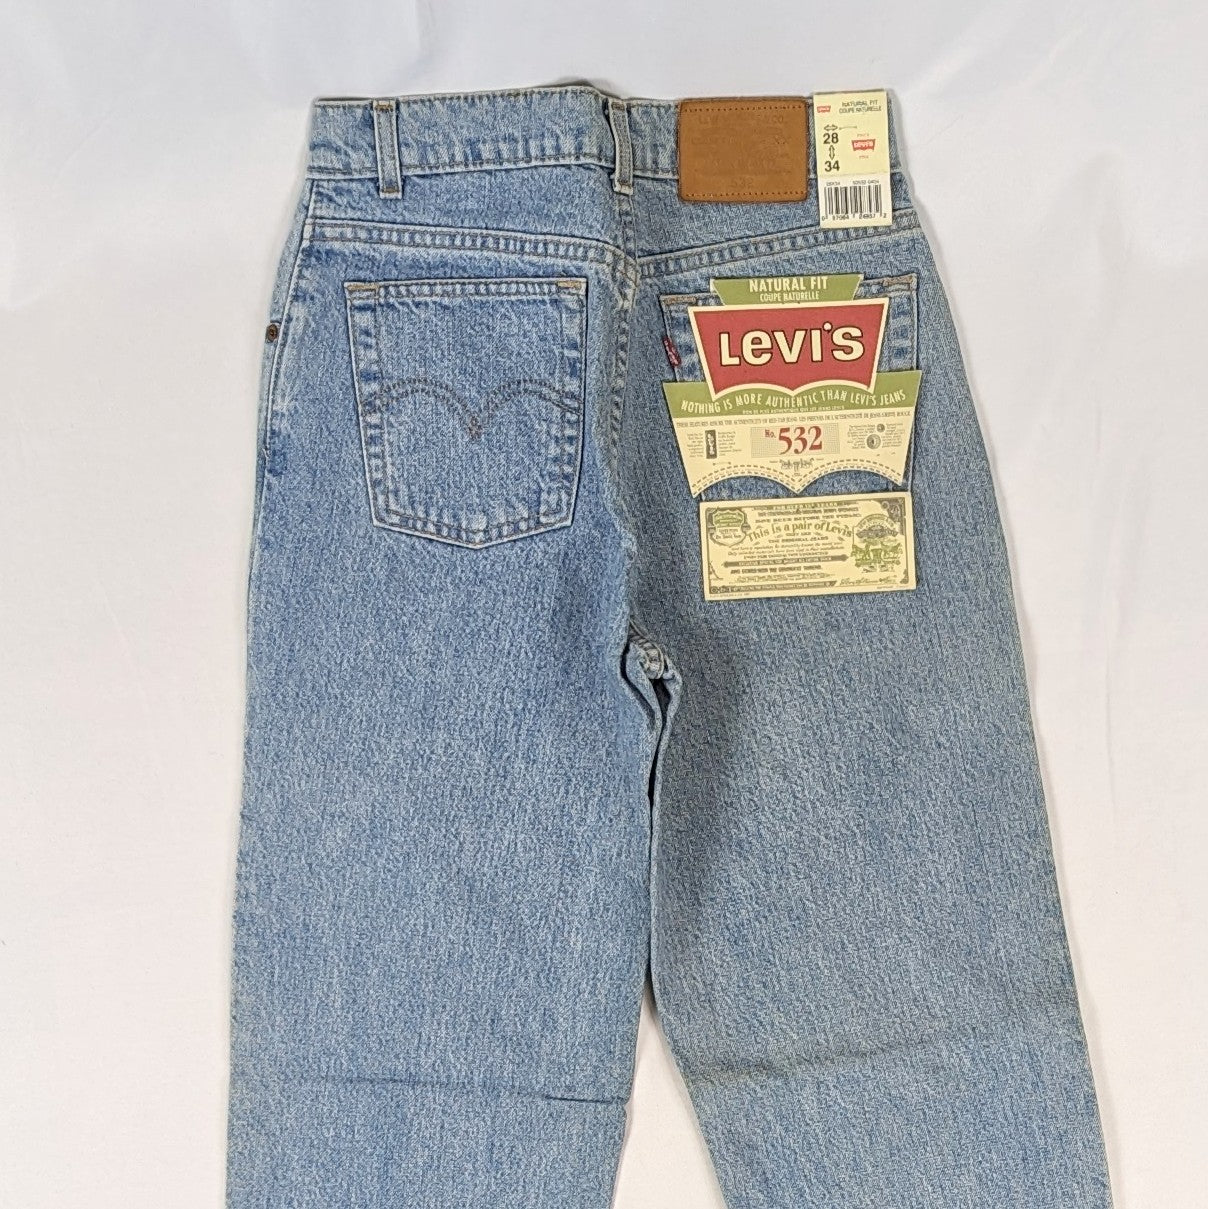 Levis jeans 532 vintage deadstock genuine leather made in Canada